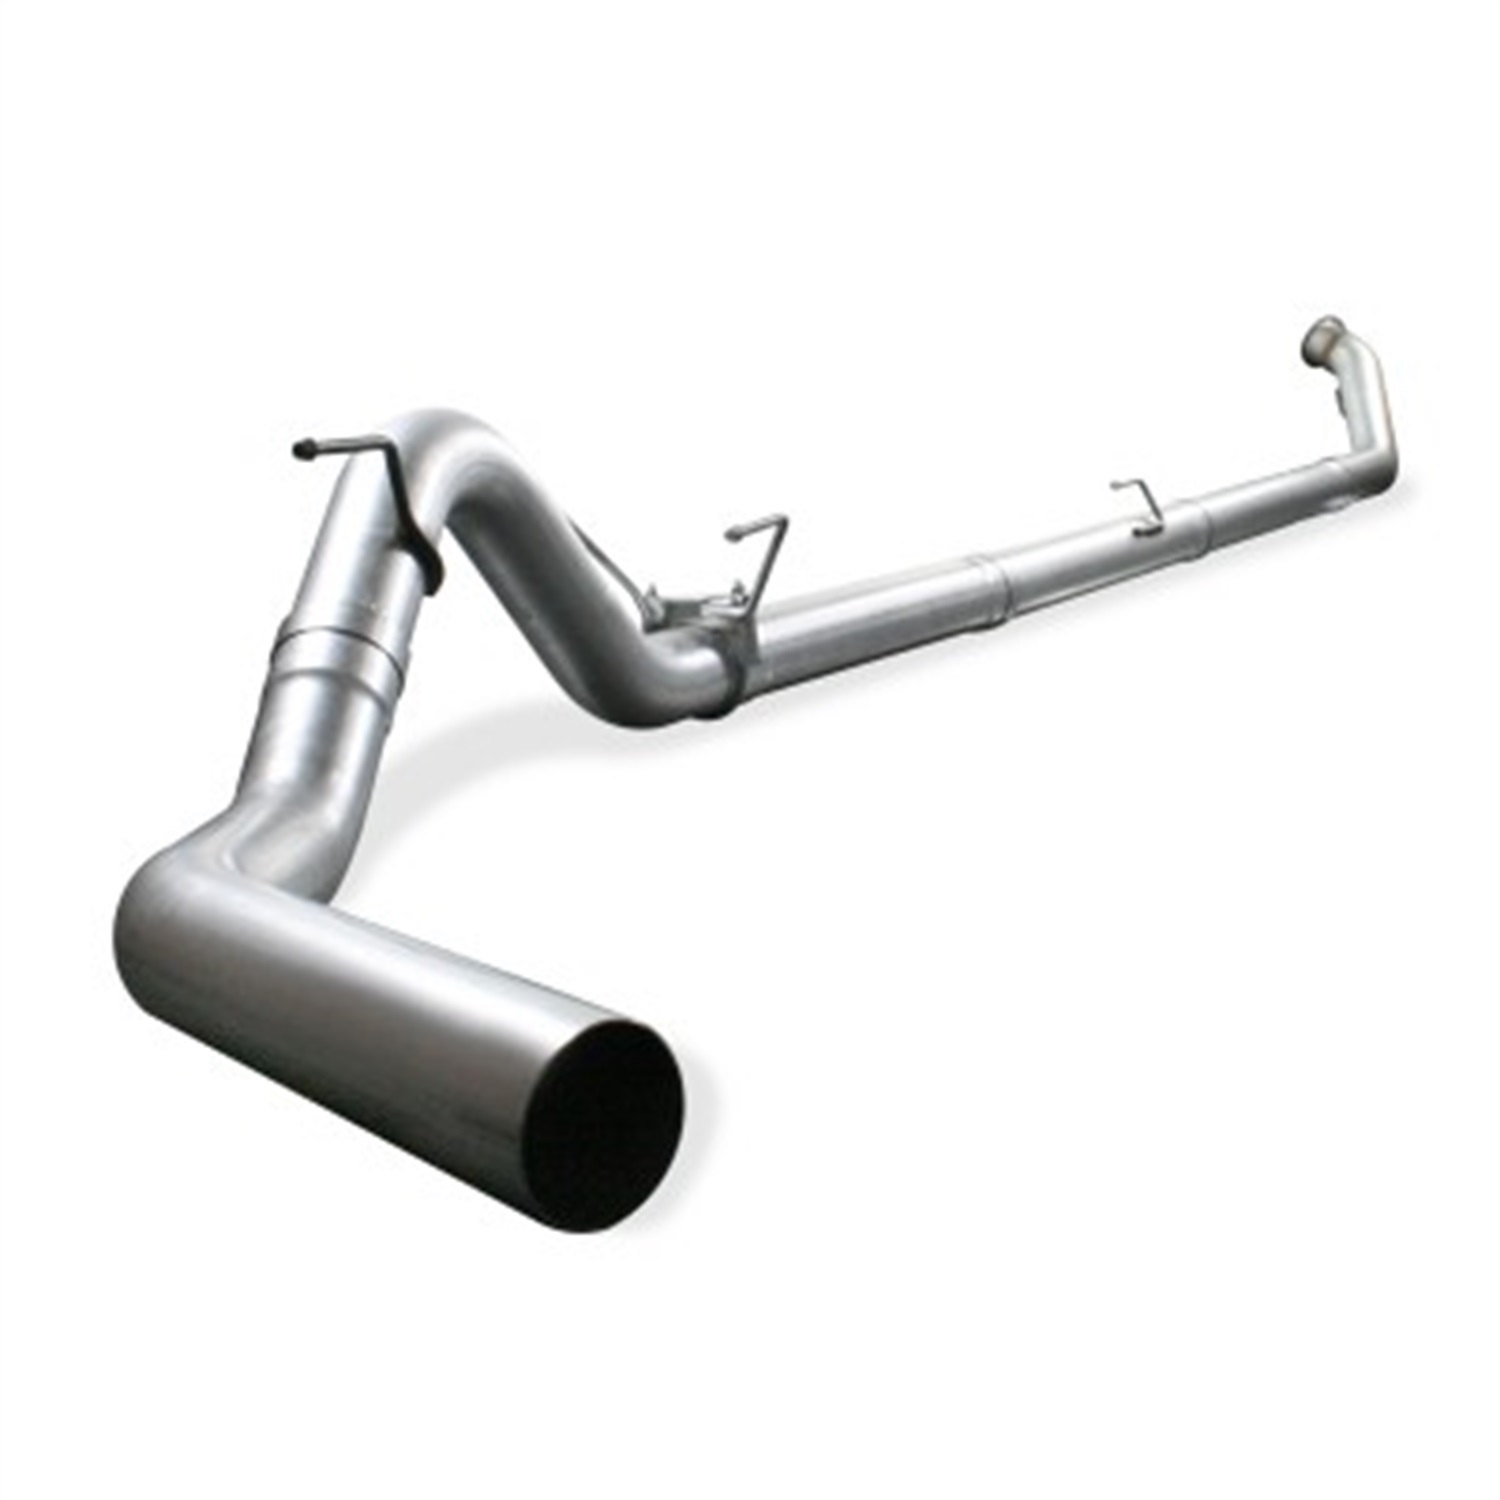 aFe Power aFe Power 49-02003NM ATLAS Turbo-Back Exhaust System Fits Ram 2500 Ram 3500